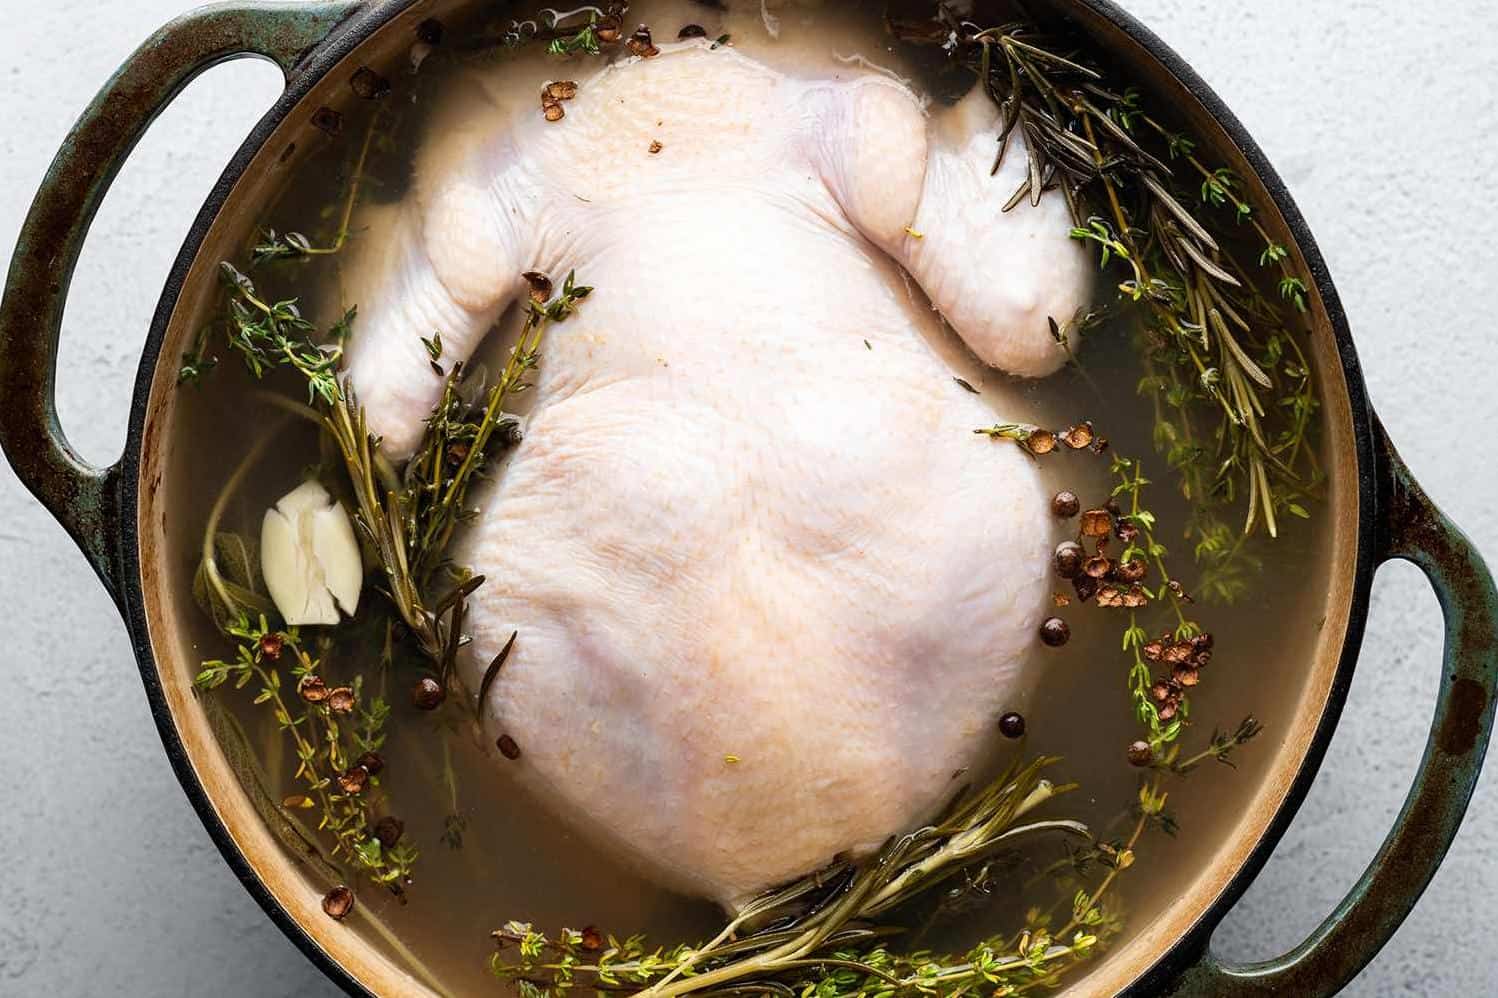  A simple brine can make all the difference in your Thanksgiving meal.